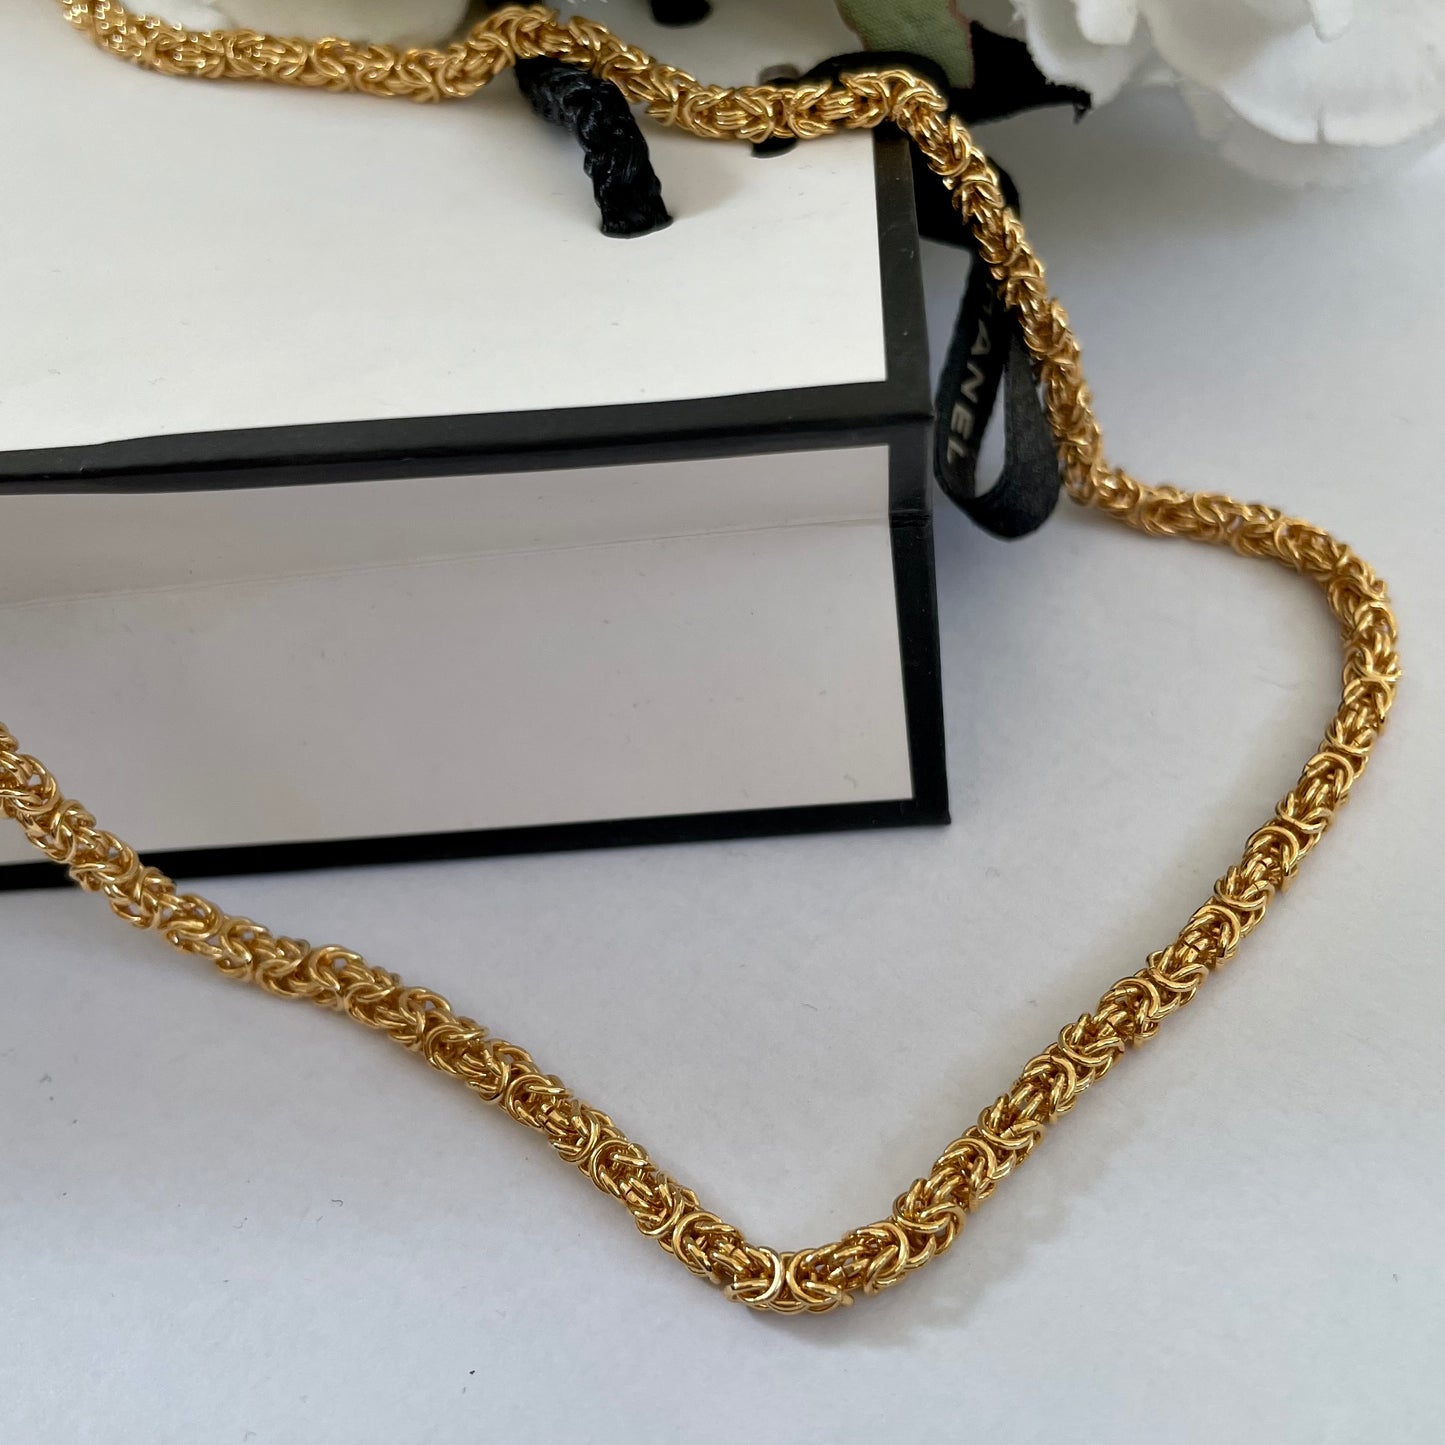 1980s Napier Gold Plated Snake Chain Necklace